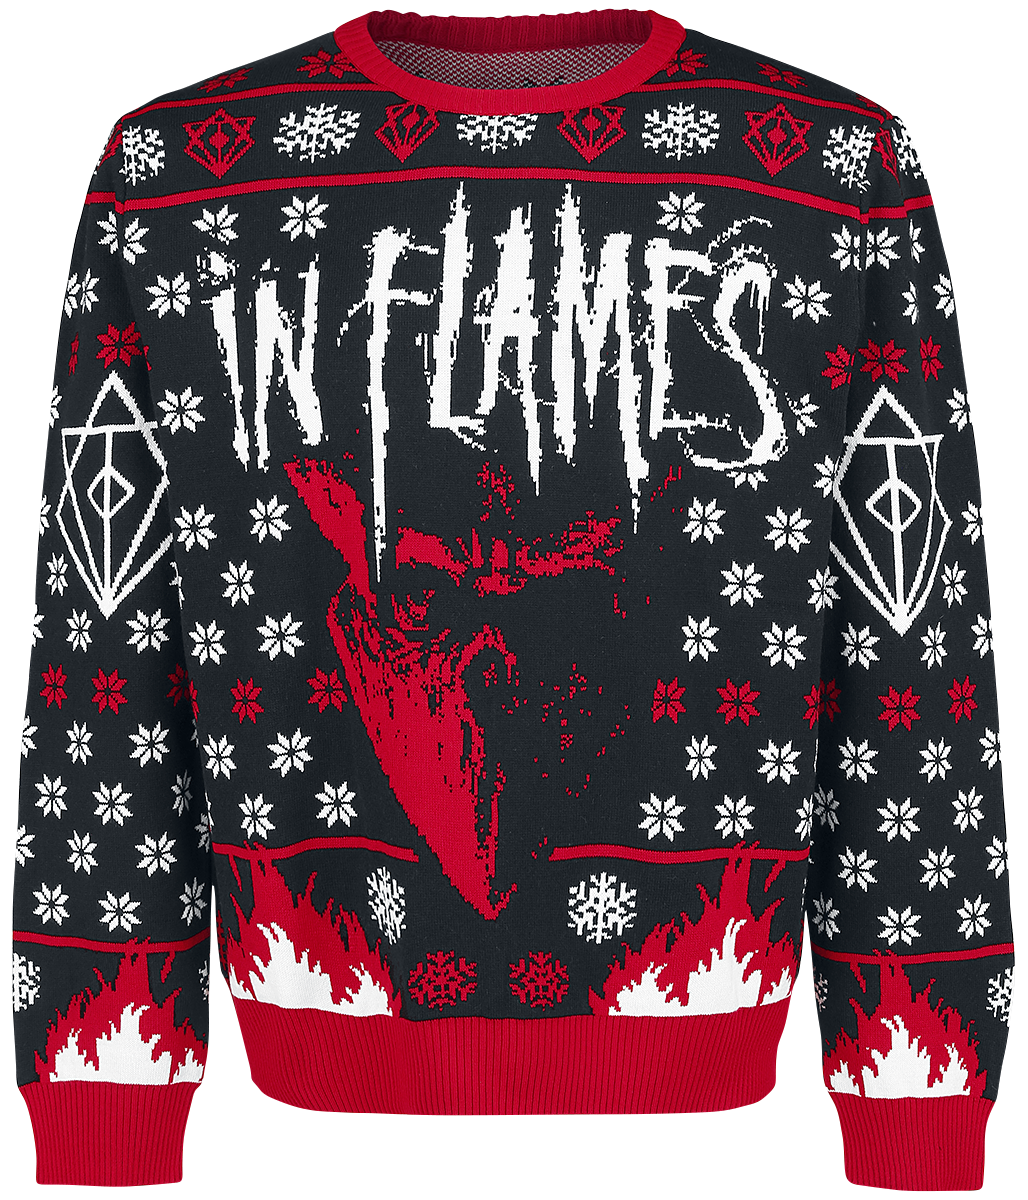 In Flames - Holiday Sweater 2019 - Sweatshirt - multicolour image